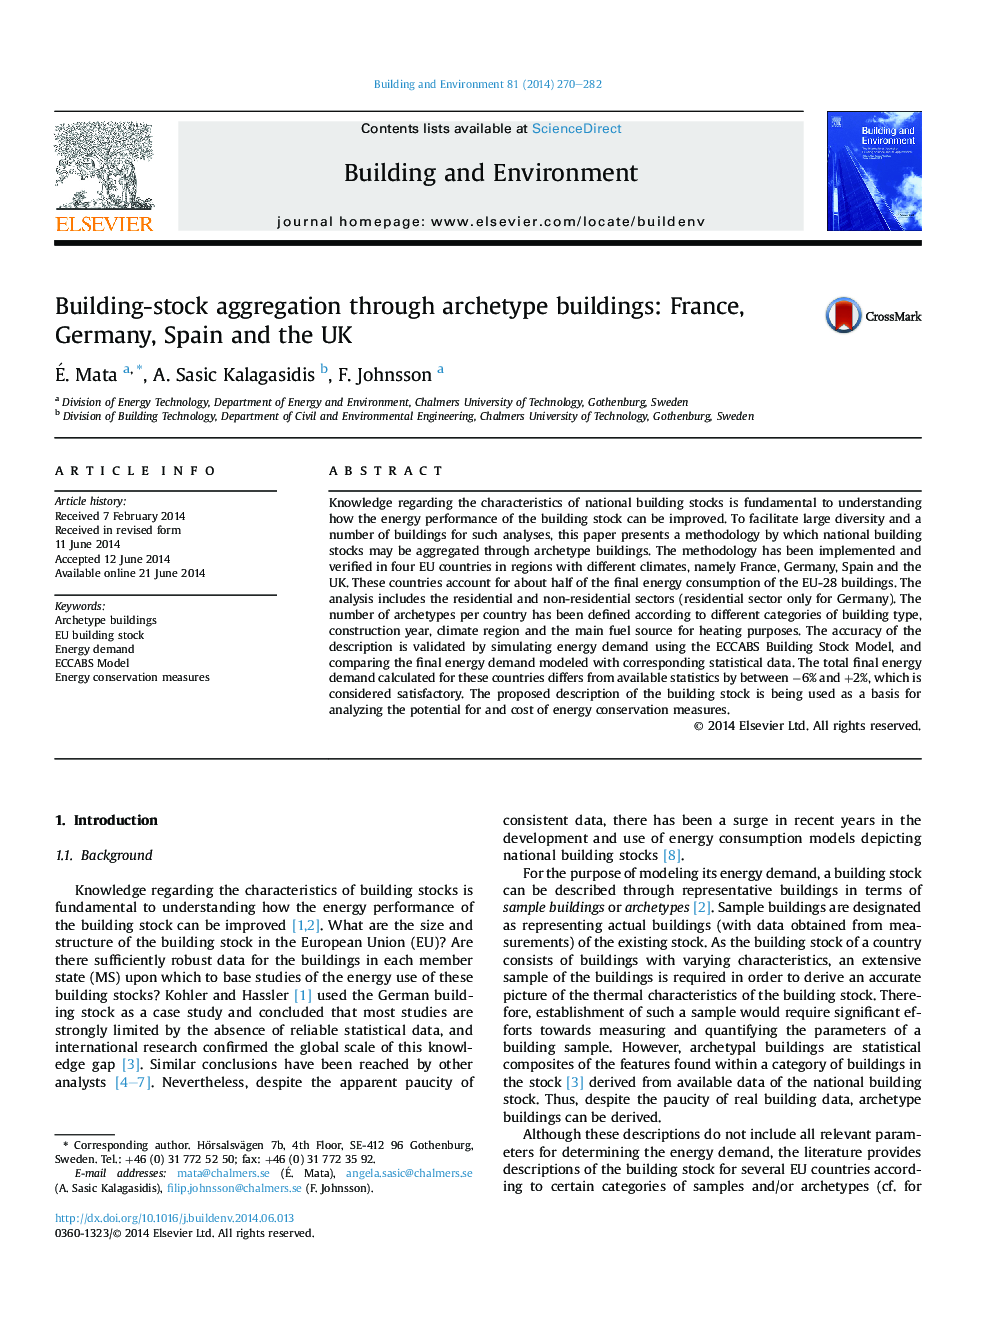 Building-stock aggregation through archetype buildings: France, Germany, Spain and the UK